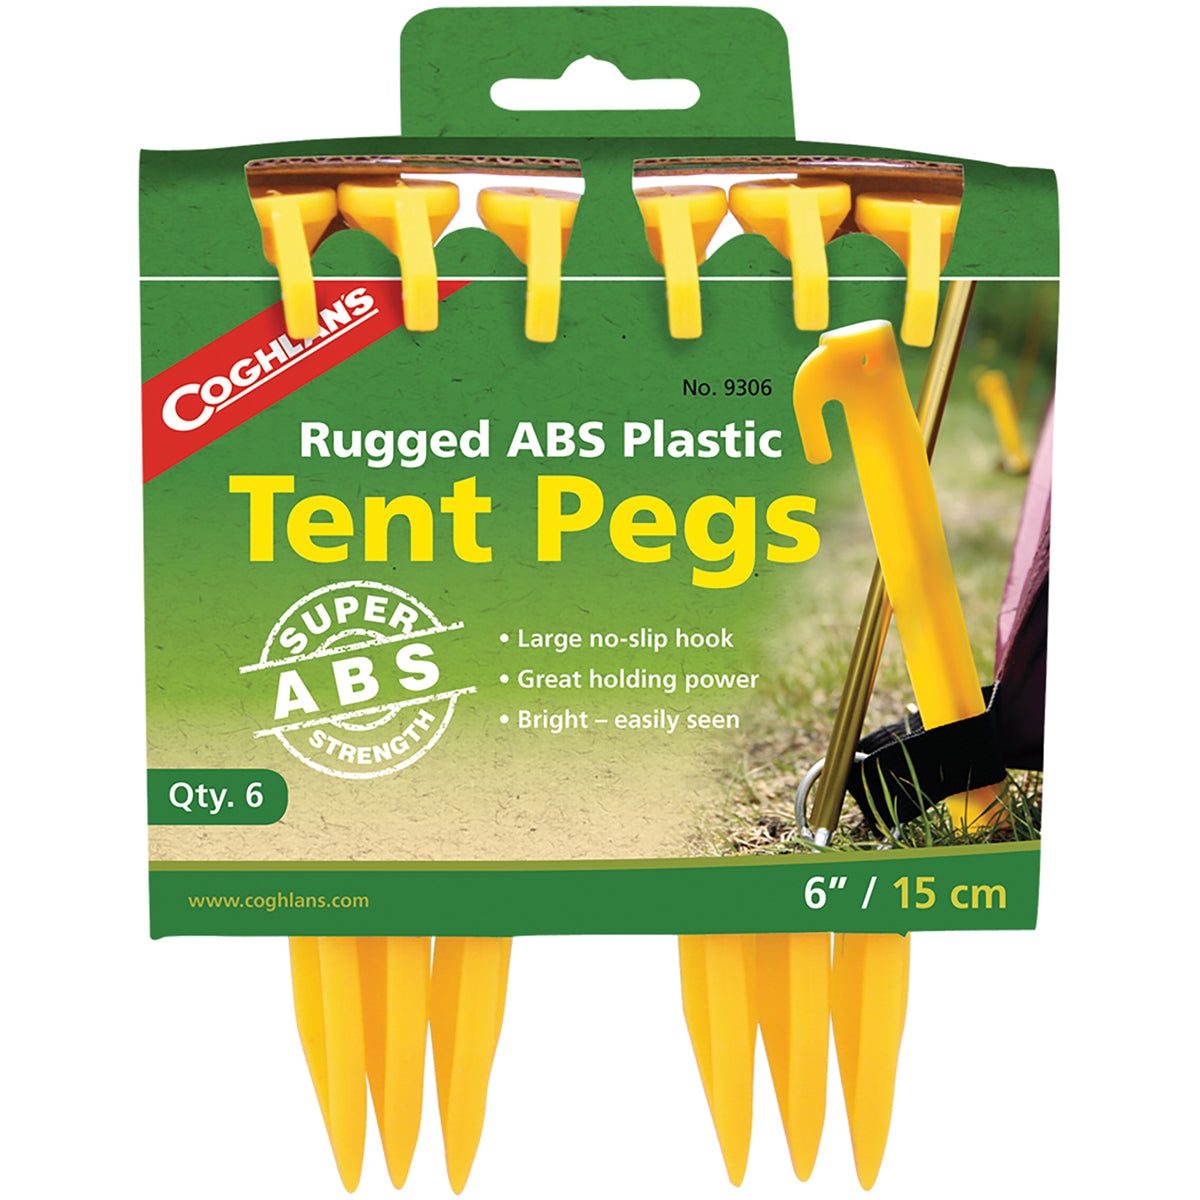 Coghlan's Rugged ABS Plastic 6" Tent Pegs (6 Pack), Survival Camping Stakes Coghlan's